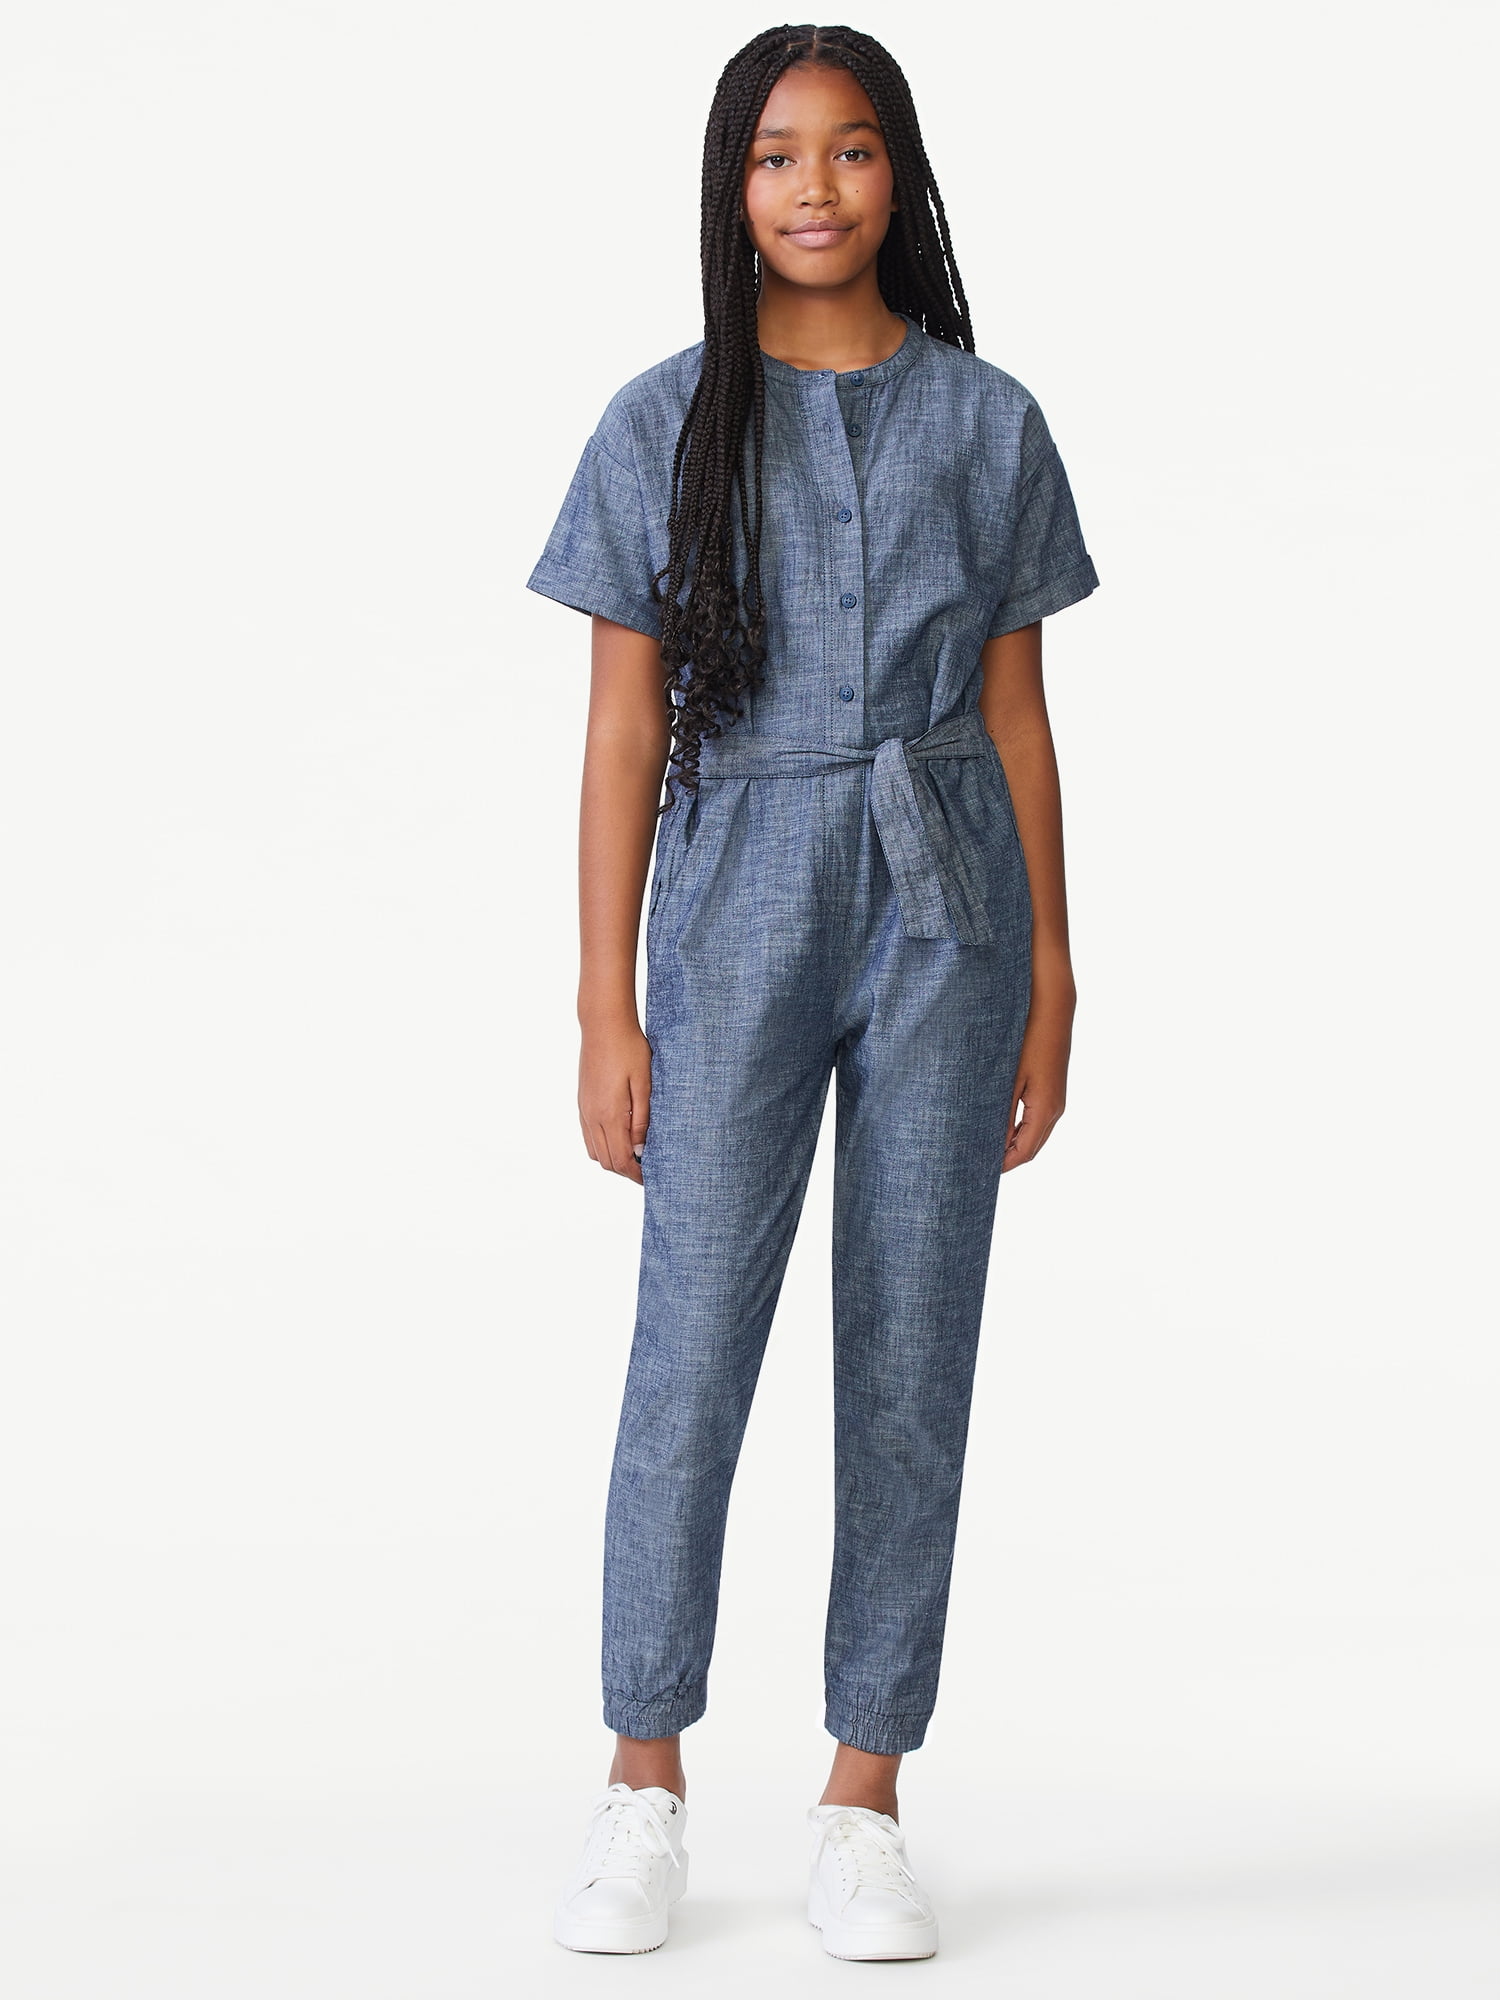 ALLIFly Girls Romper Stretchy Short Jumpsuit with India | Ubuy-nlmtdanang.com.vn